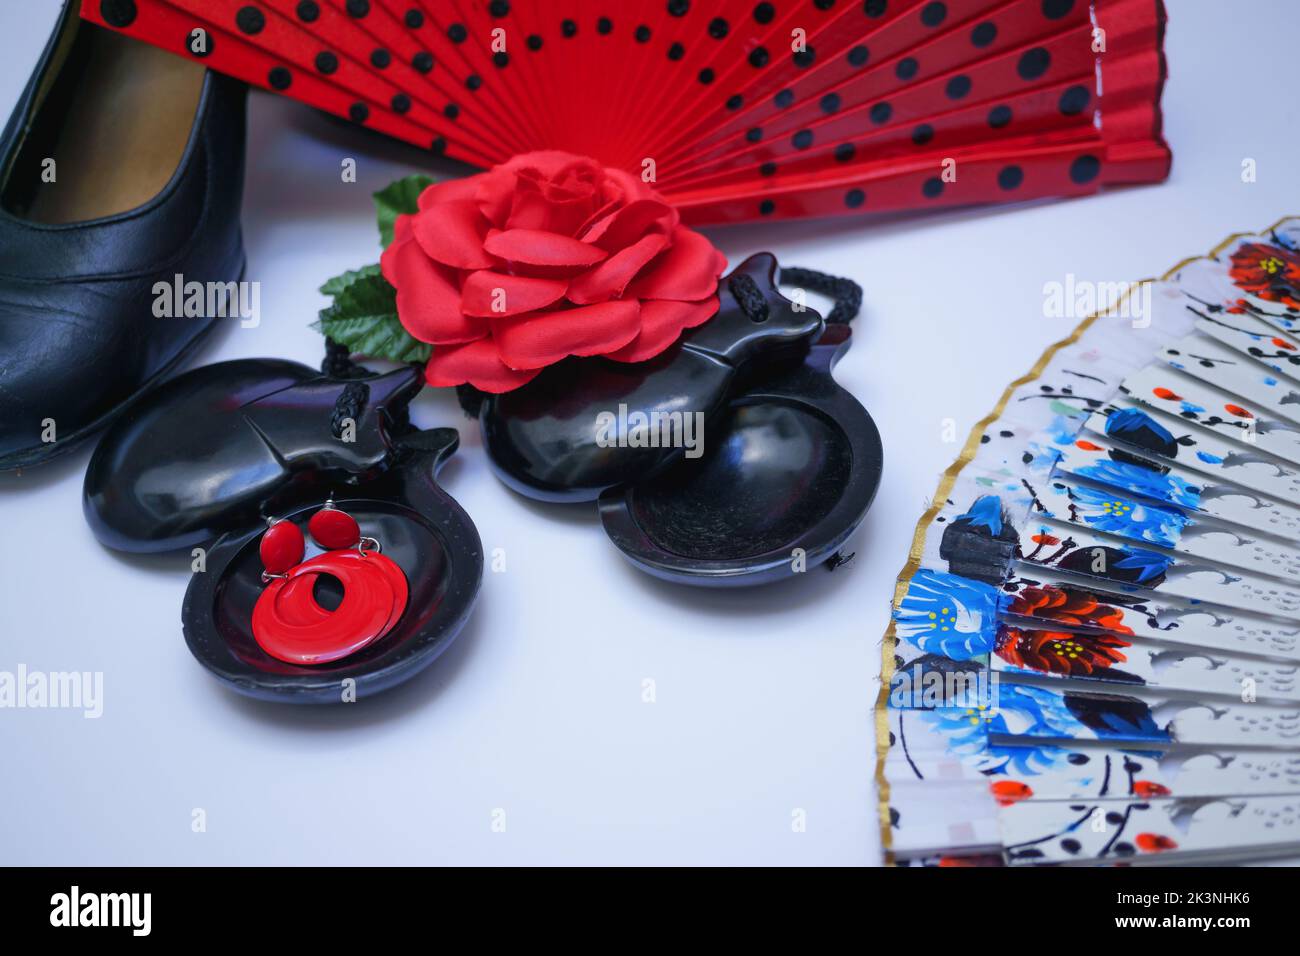 objects used in flamenco fan, castanets, high heel shoes and earrings on a white background Stock Photo